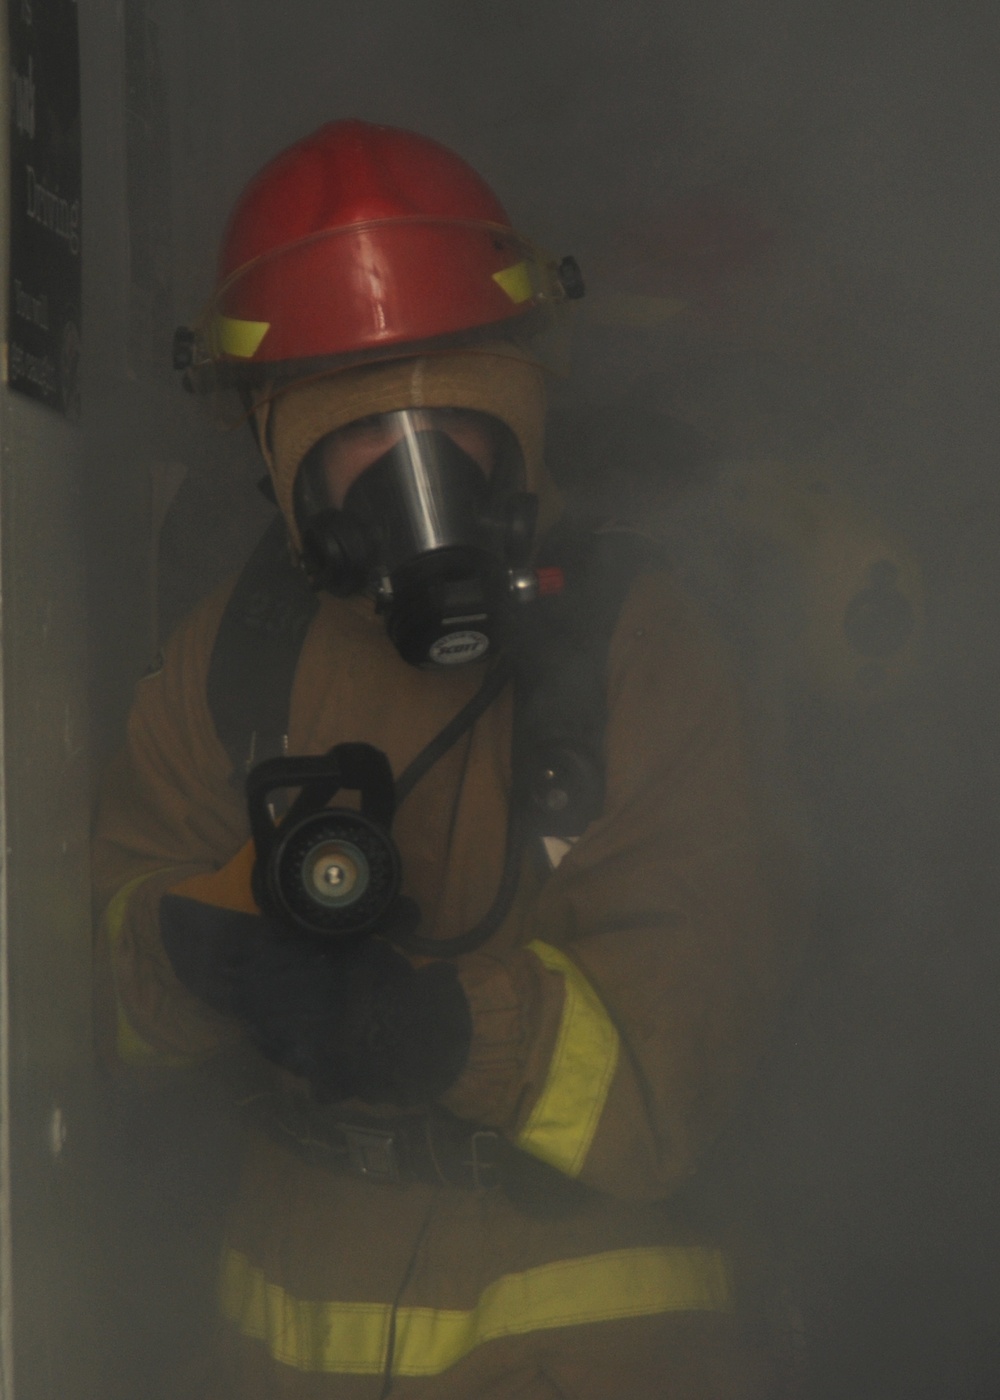 Fighting a simulated fire